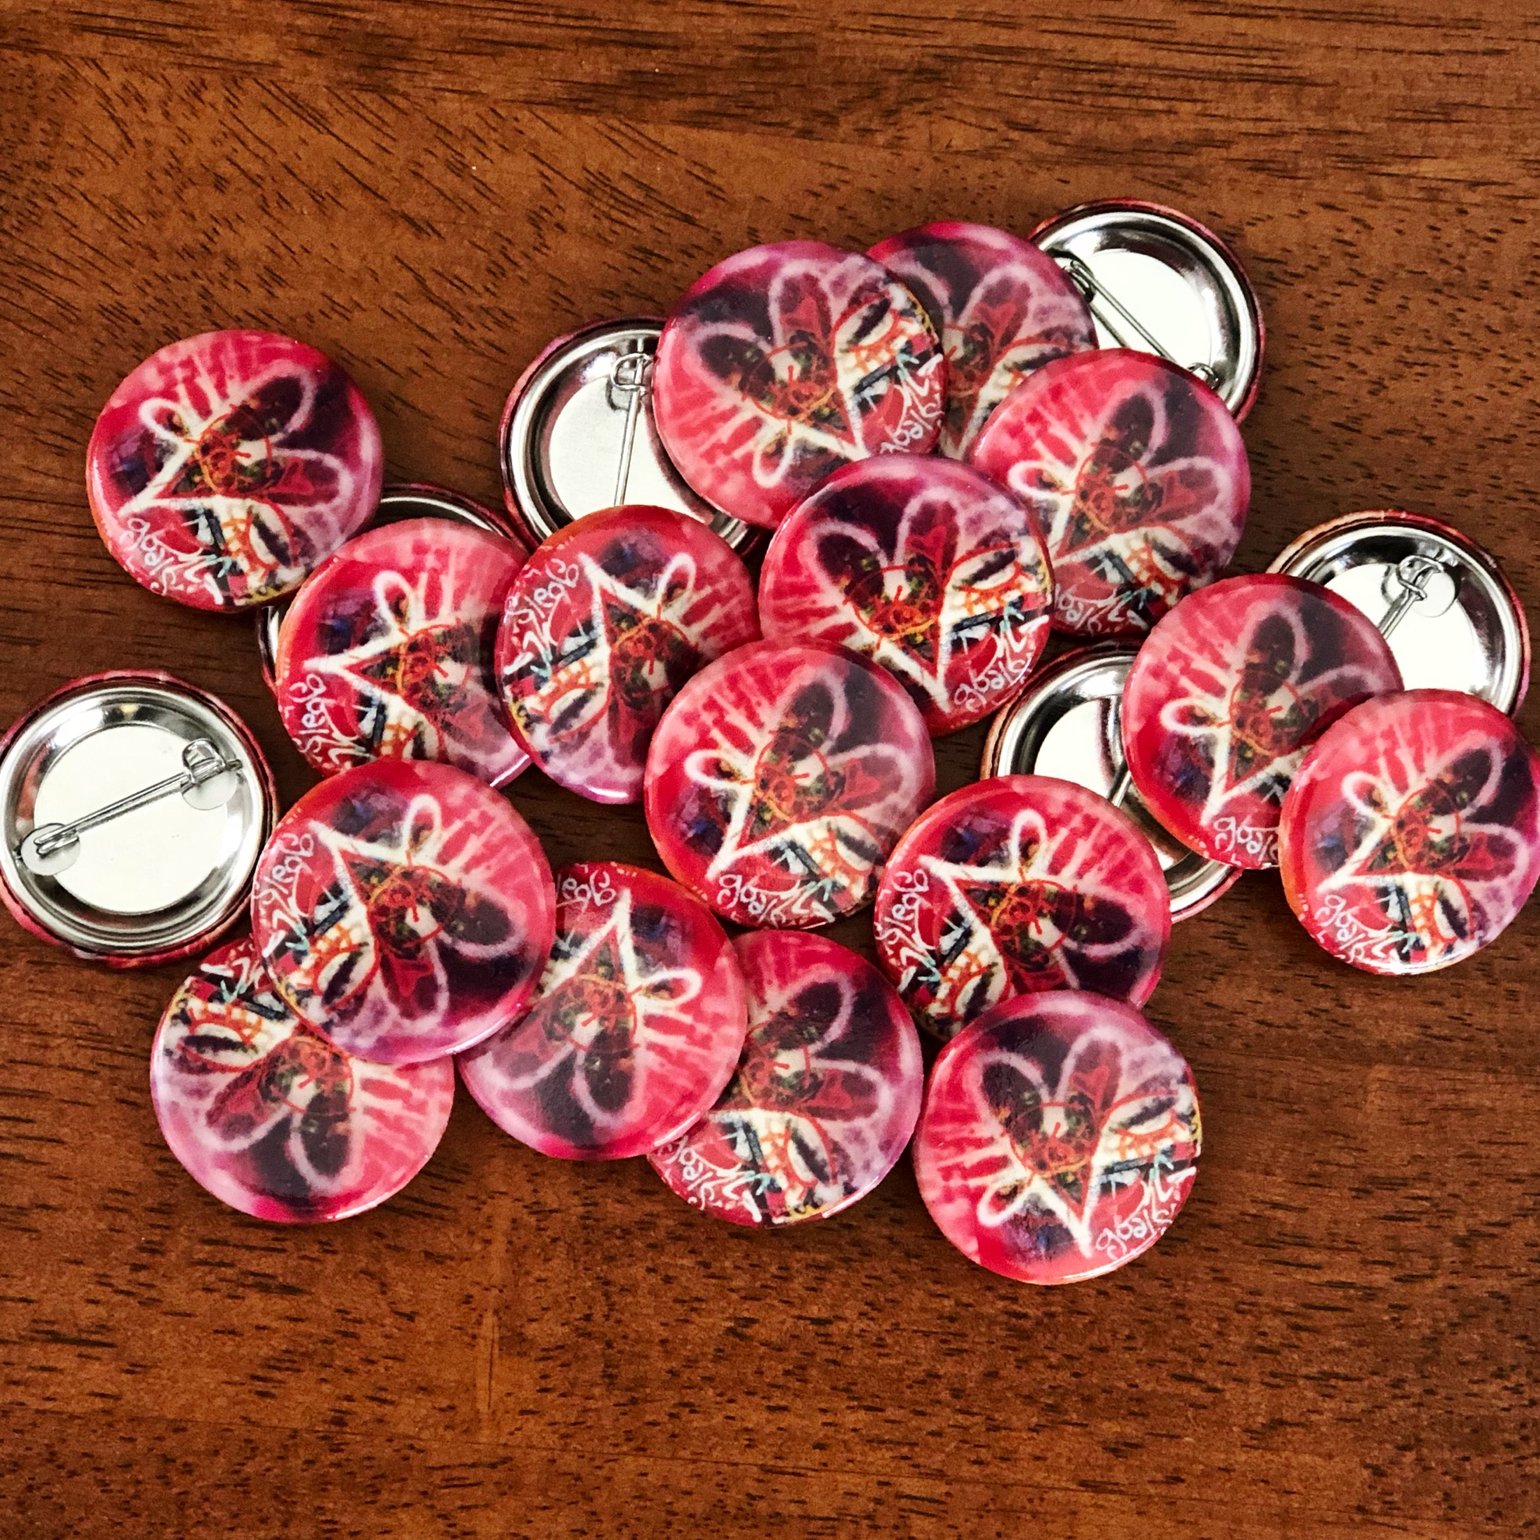 Image of "Love Goals" Mini Buttons